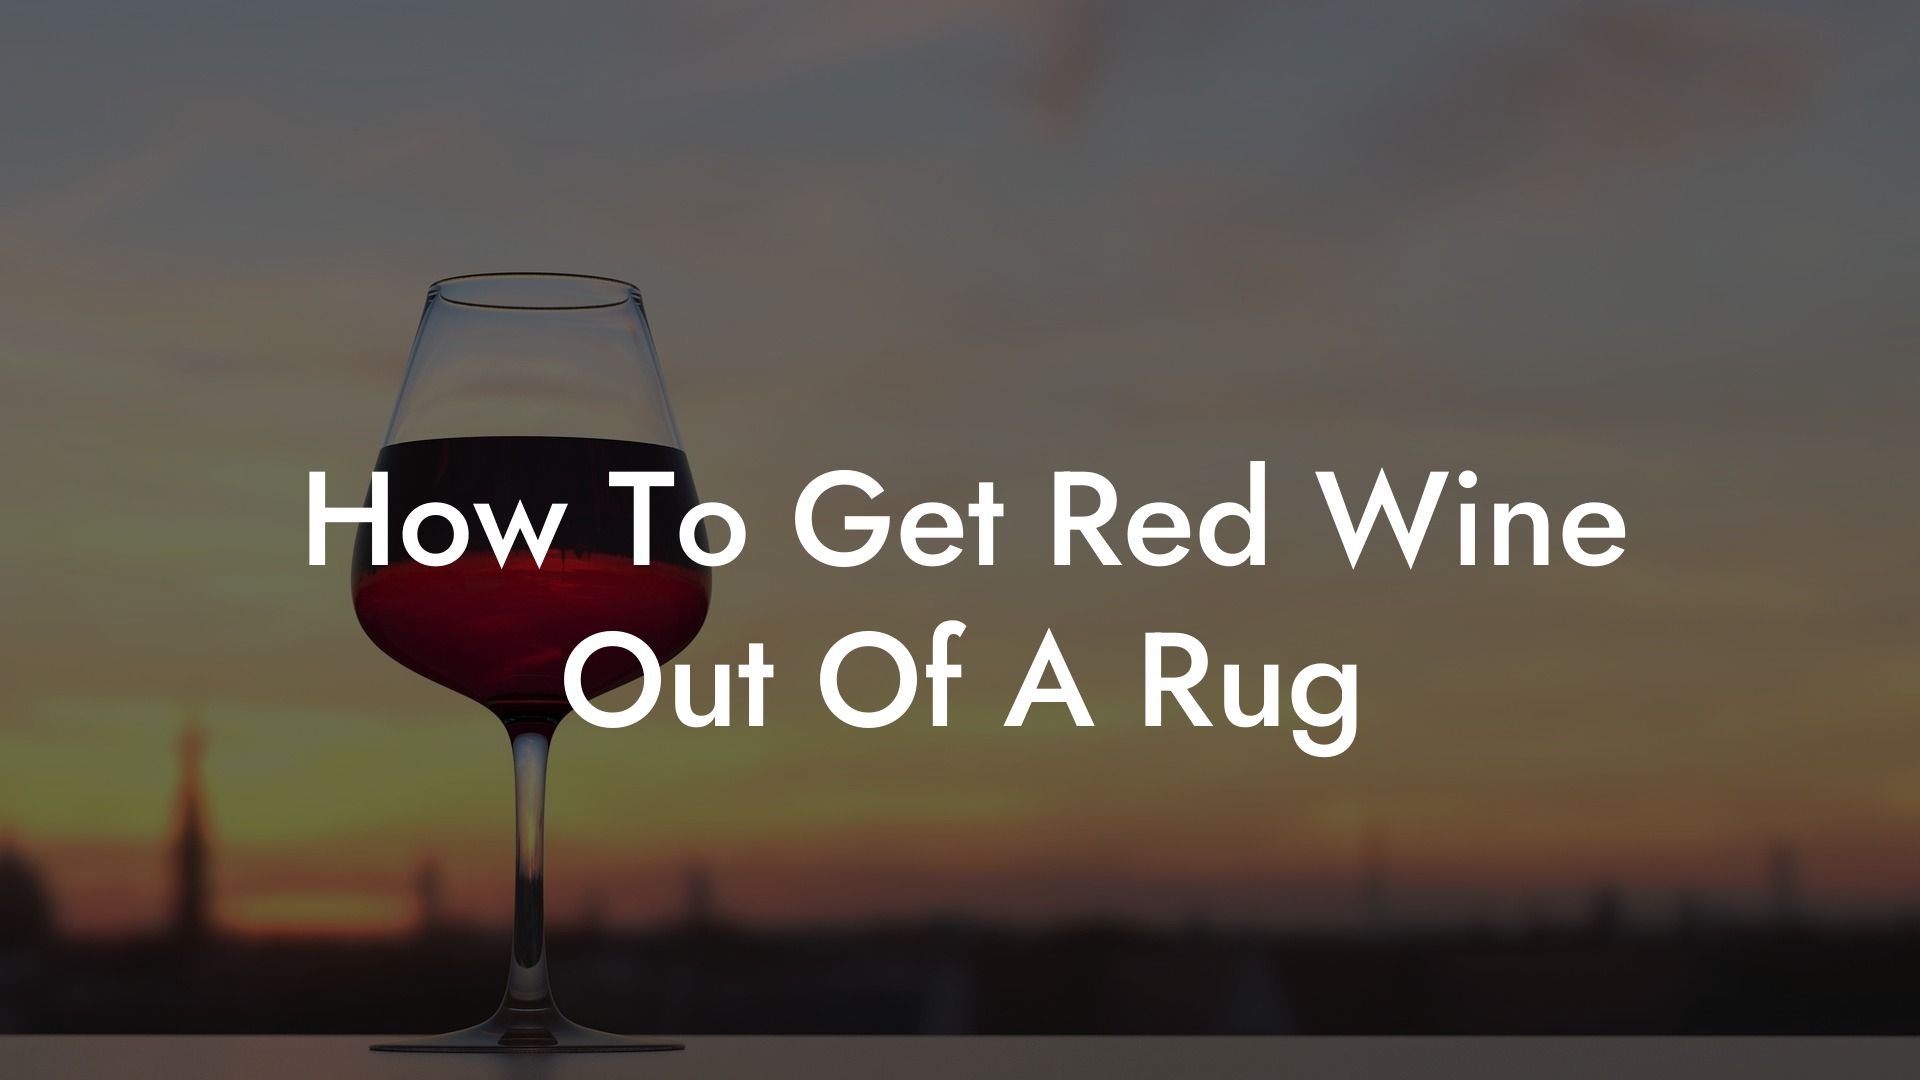 How To Get Red Wine Out Of A Rug